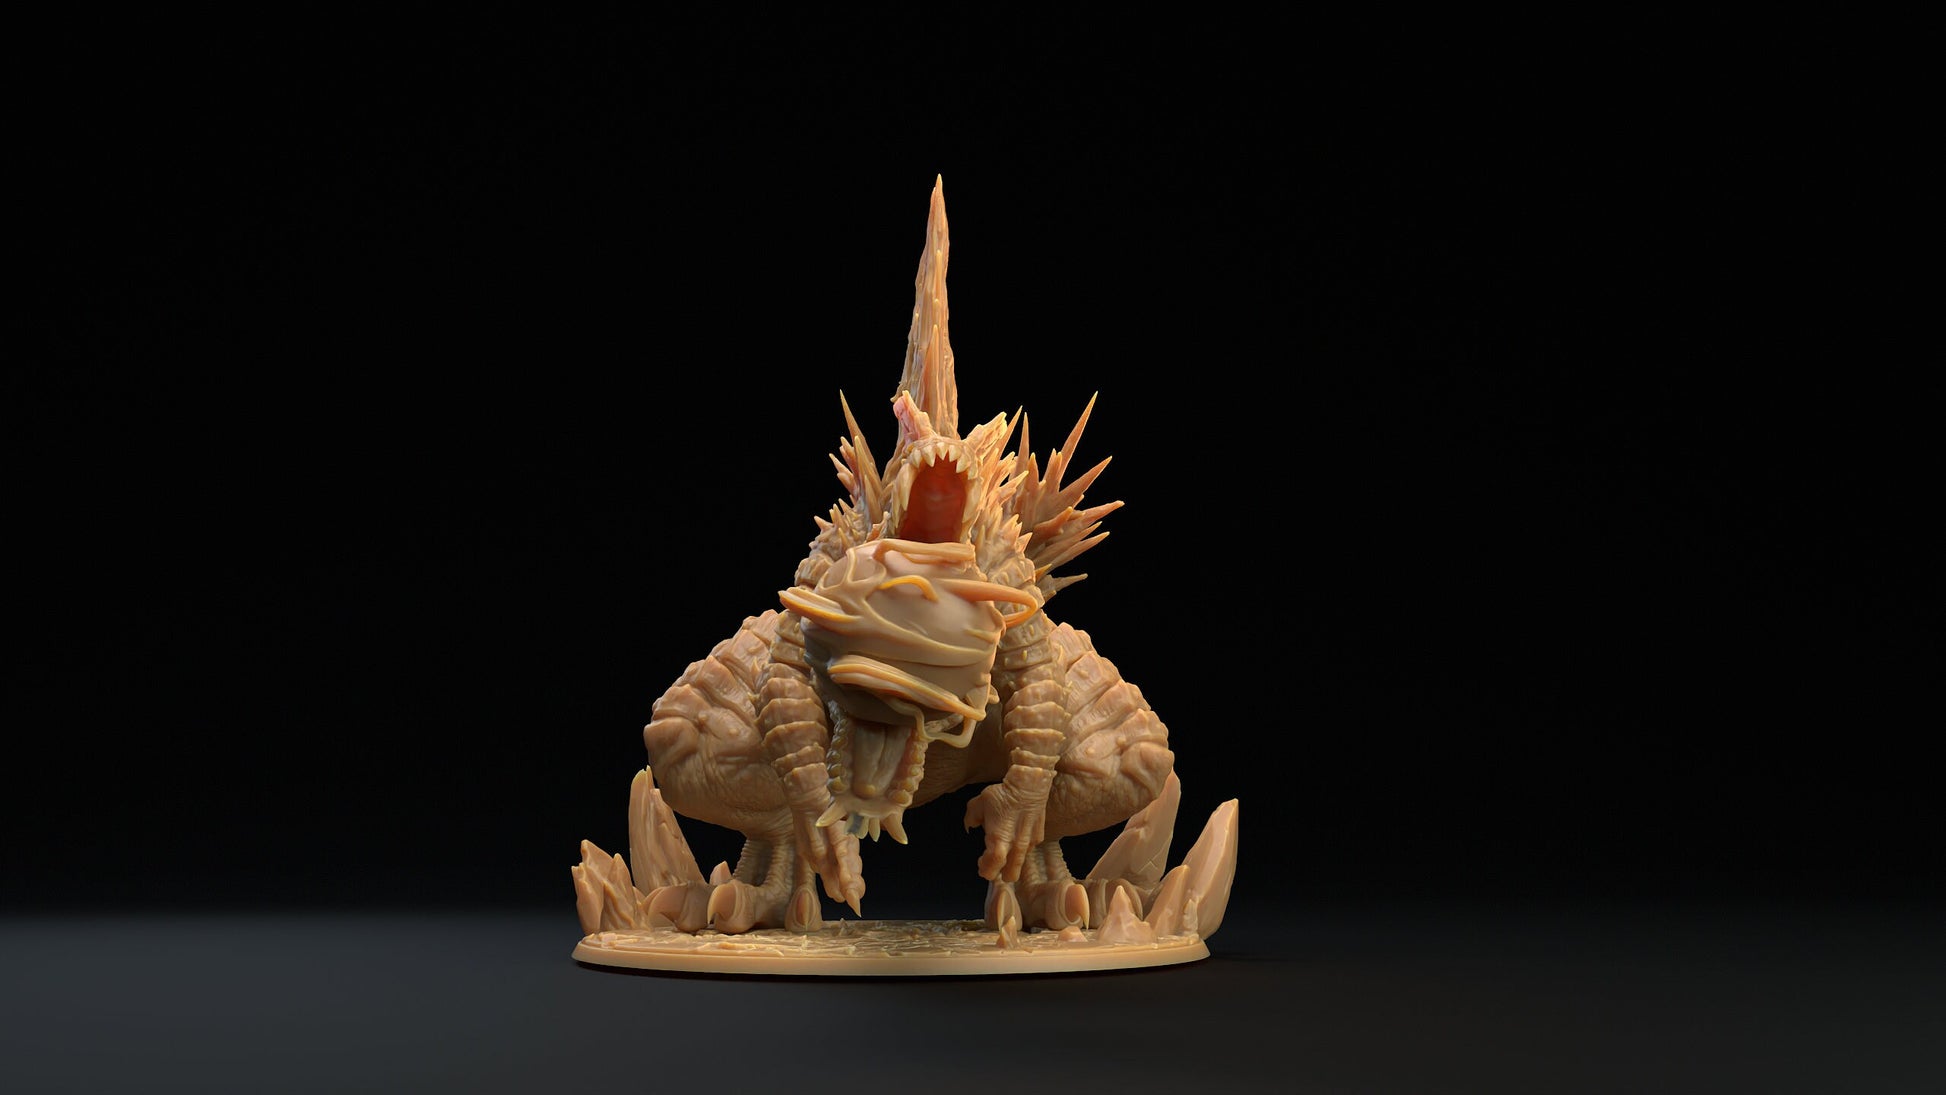 Hyperspine | RPG Miniature for Dungeons and Dragons|Pathfinder|Tabletop Wargaming | Monster Miniature | Dragon Trappers Lodge